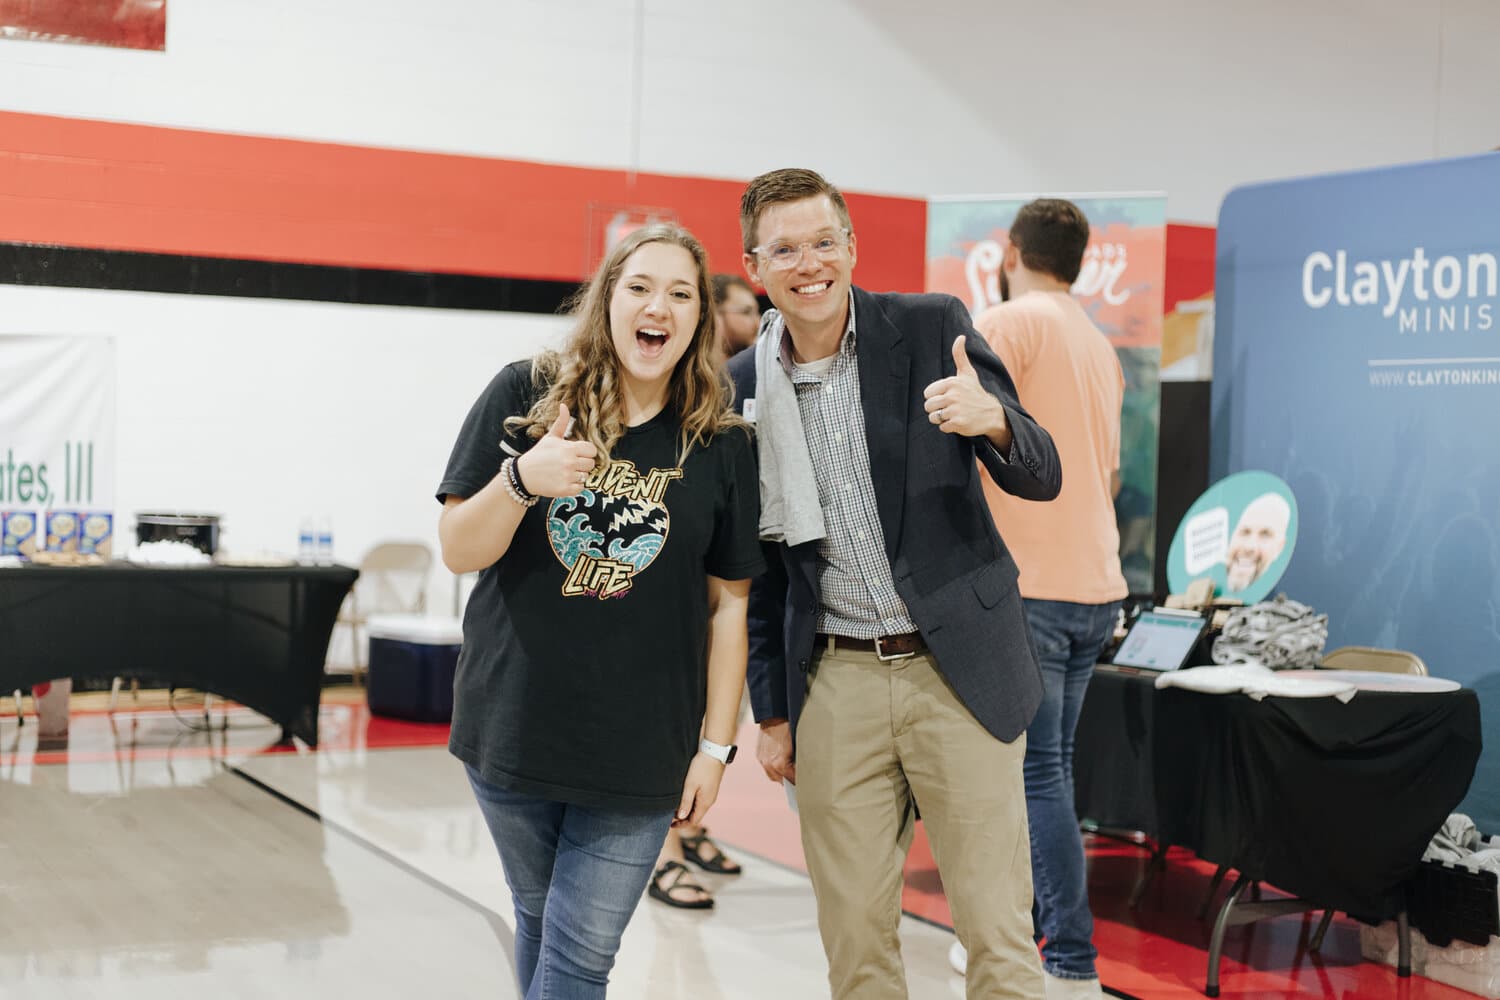 Familiar NGU faces, including grad assistant Nicole Pollard and outreach staff member Joshua Gilmore, give a thumbs up for the students who are finding summer plans through this event.